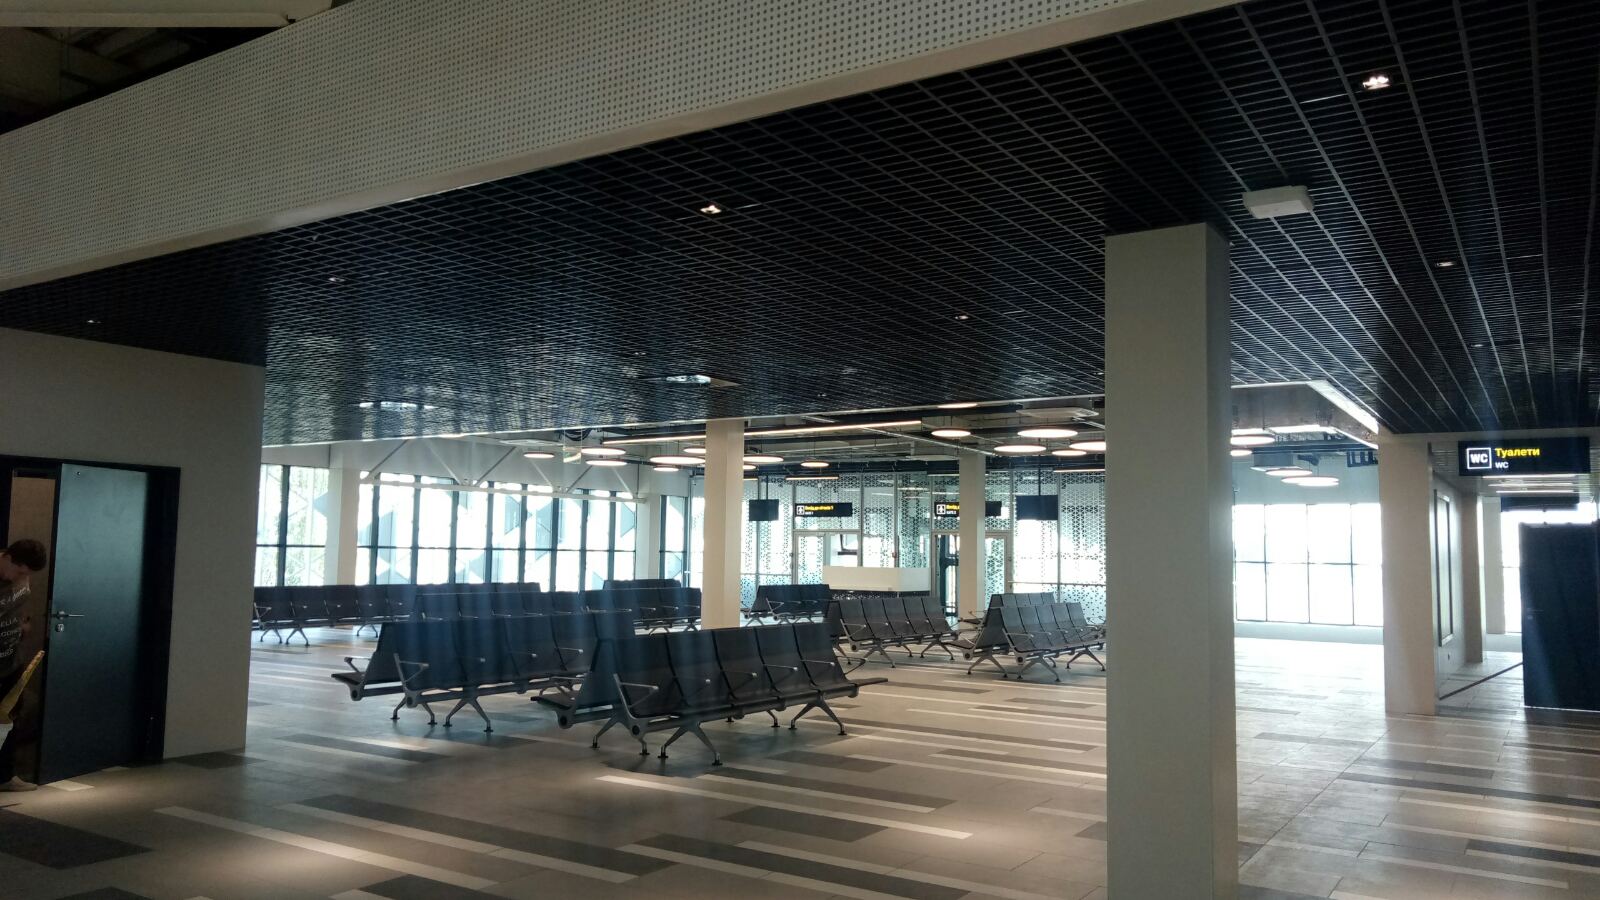 Open cell suspended ceiling grilyato Kraft in airport